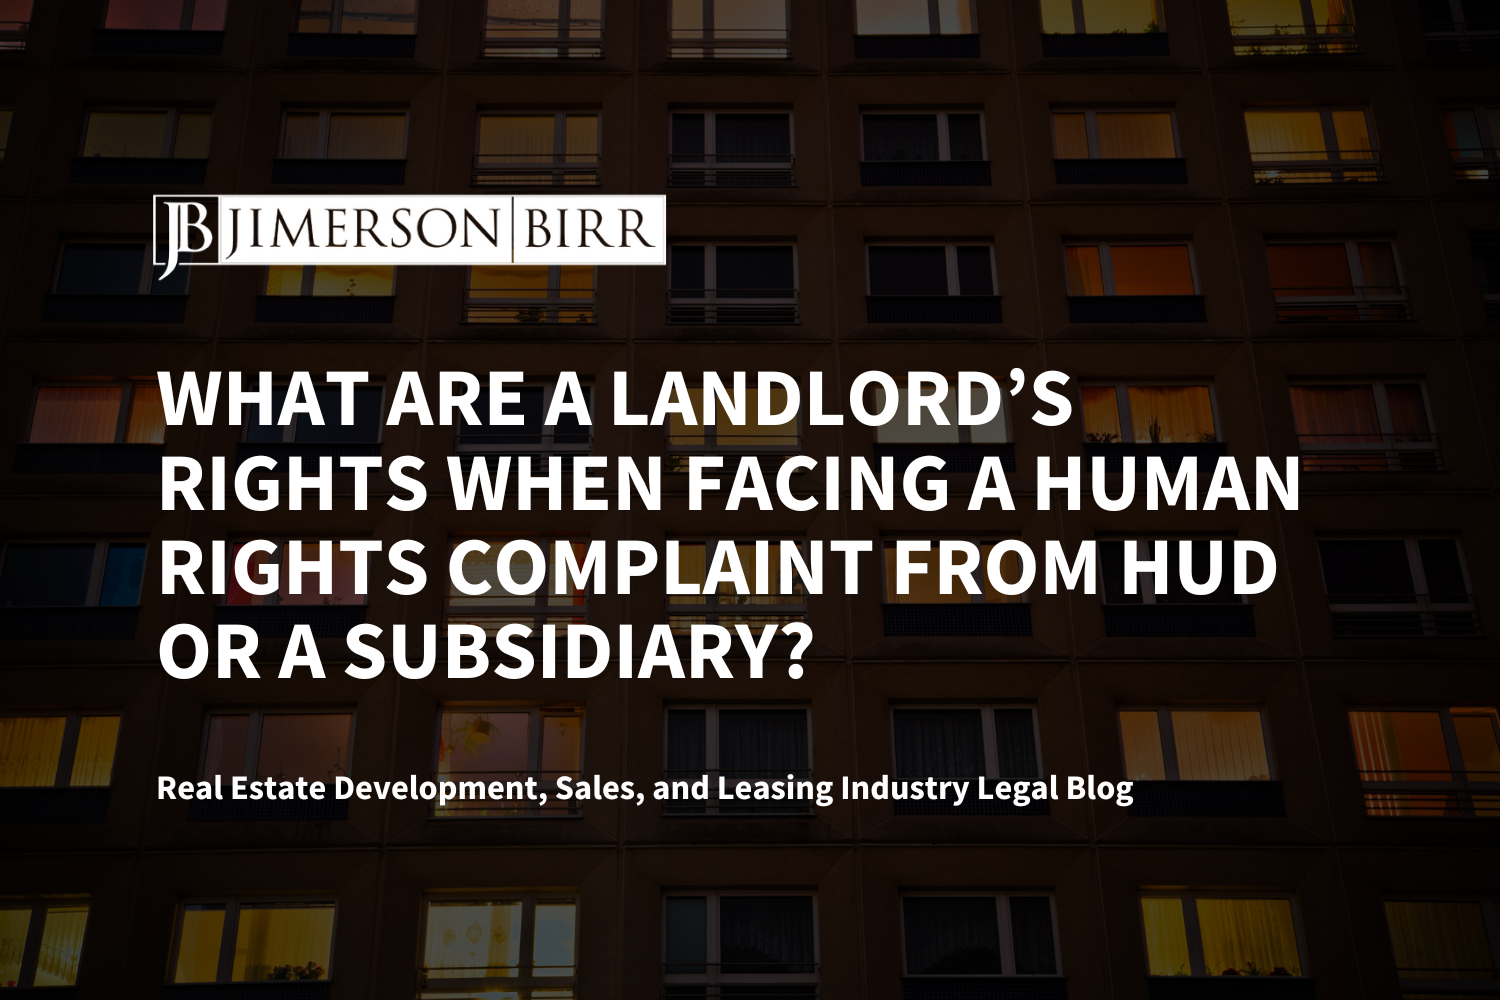 What are a Landlord’s Rights When Facing a Human Rights Complaint from HUD or a Subsidiary?